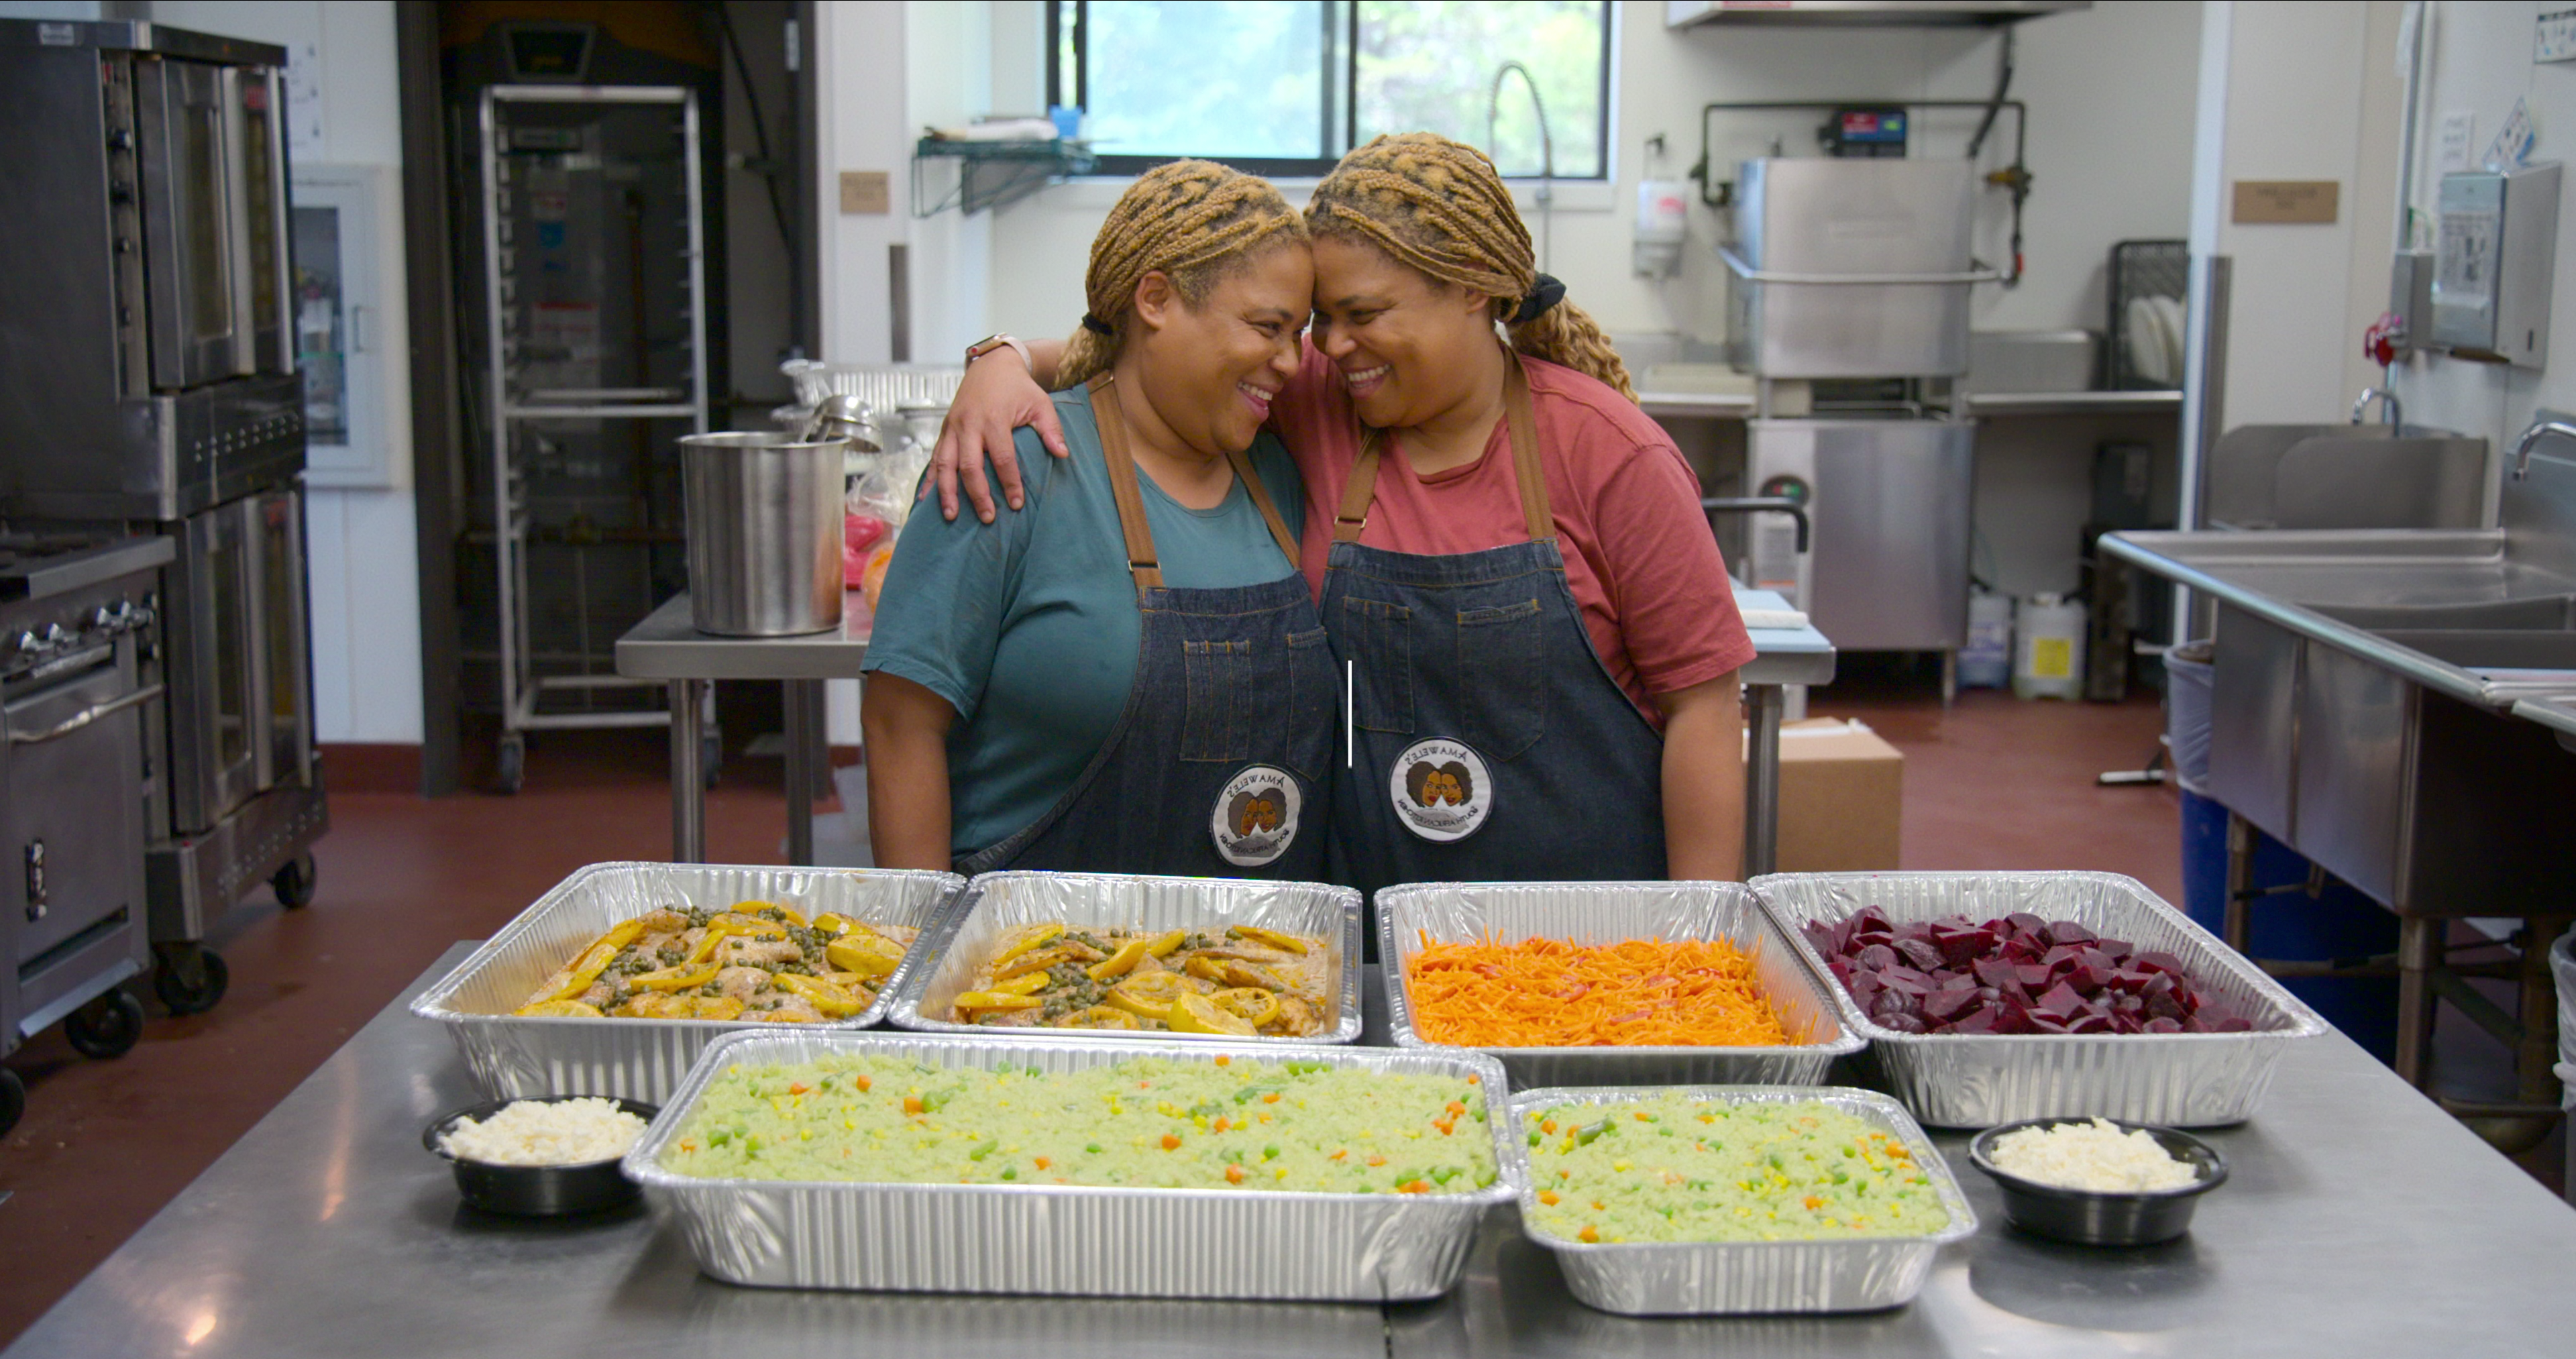 Two women, identical twins, wear aprons and stand in a kitchen with their arms over each other’s shoulders and their heads together. In front of them is a counter with trays of food to be prepped.